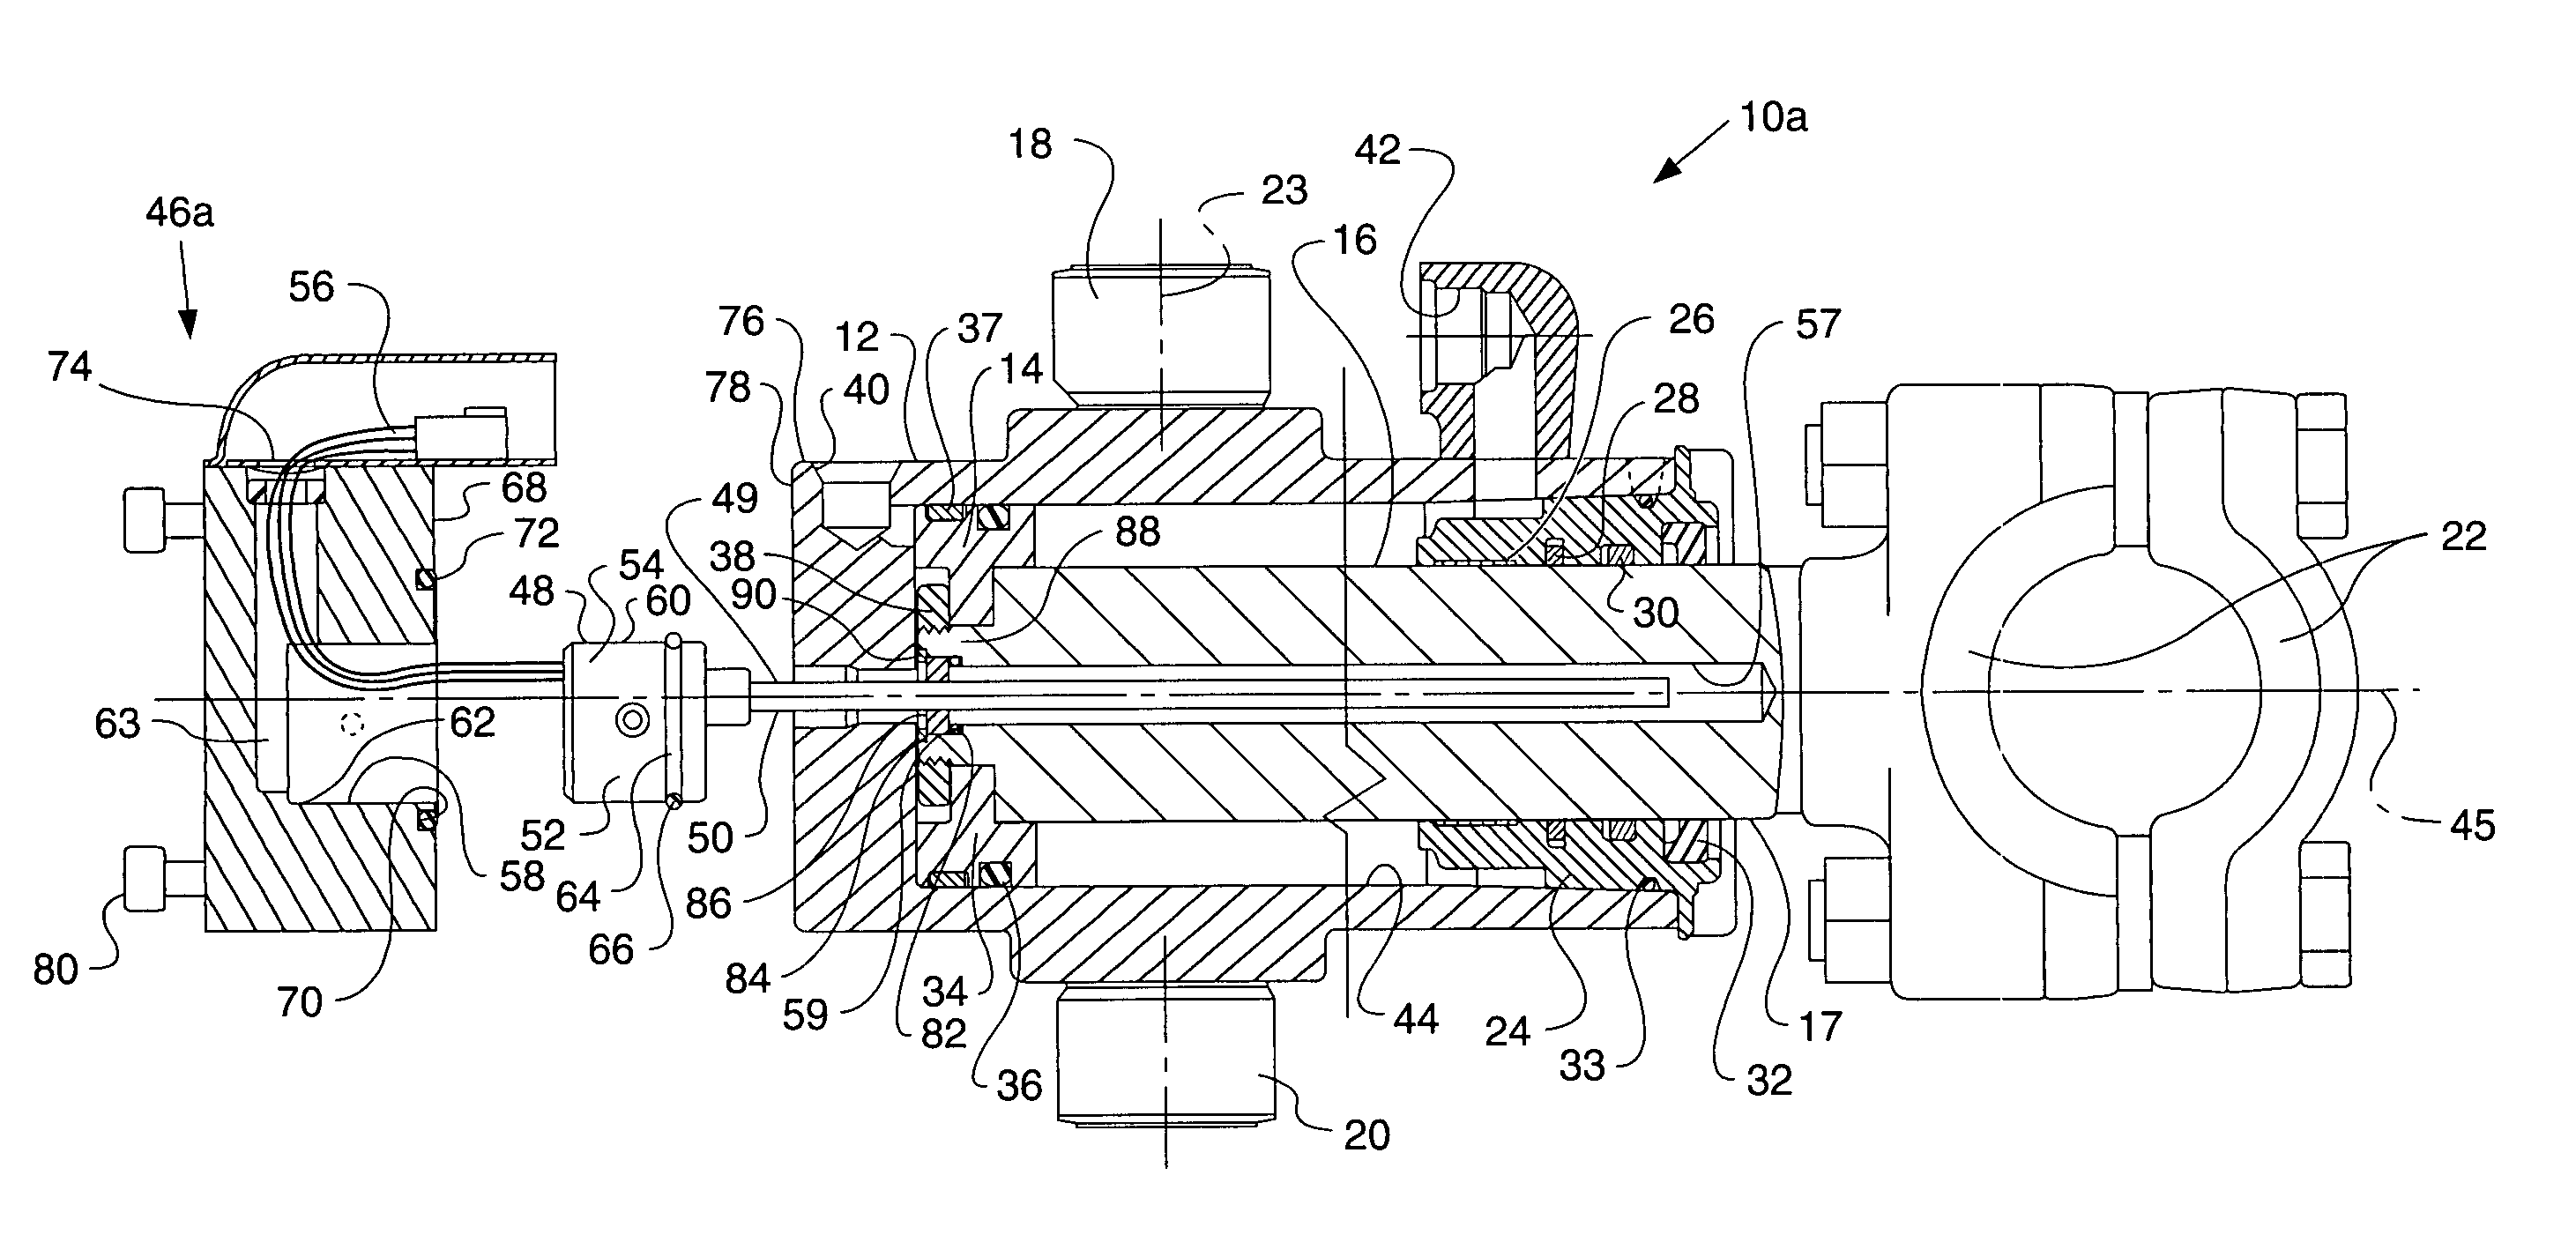 Position sensing cylinder cap for ease of service and assembly